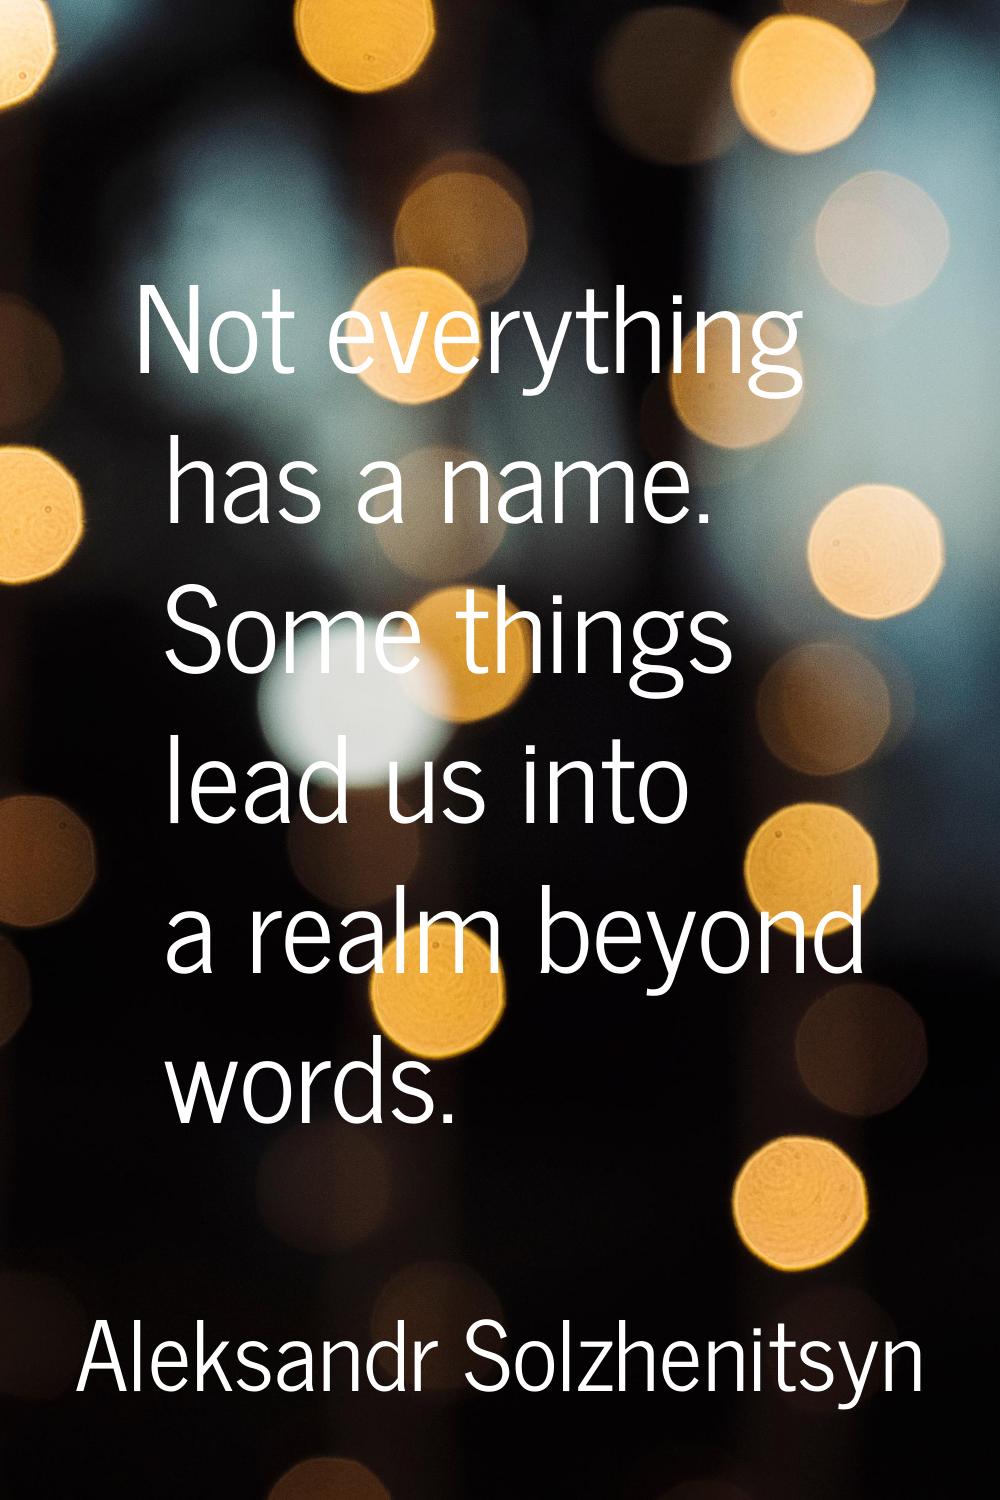 Not everything has a name. Some things lead us into a realm beyond words.